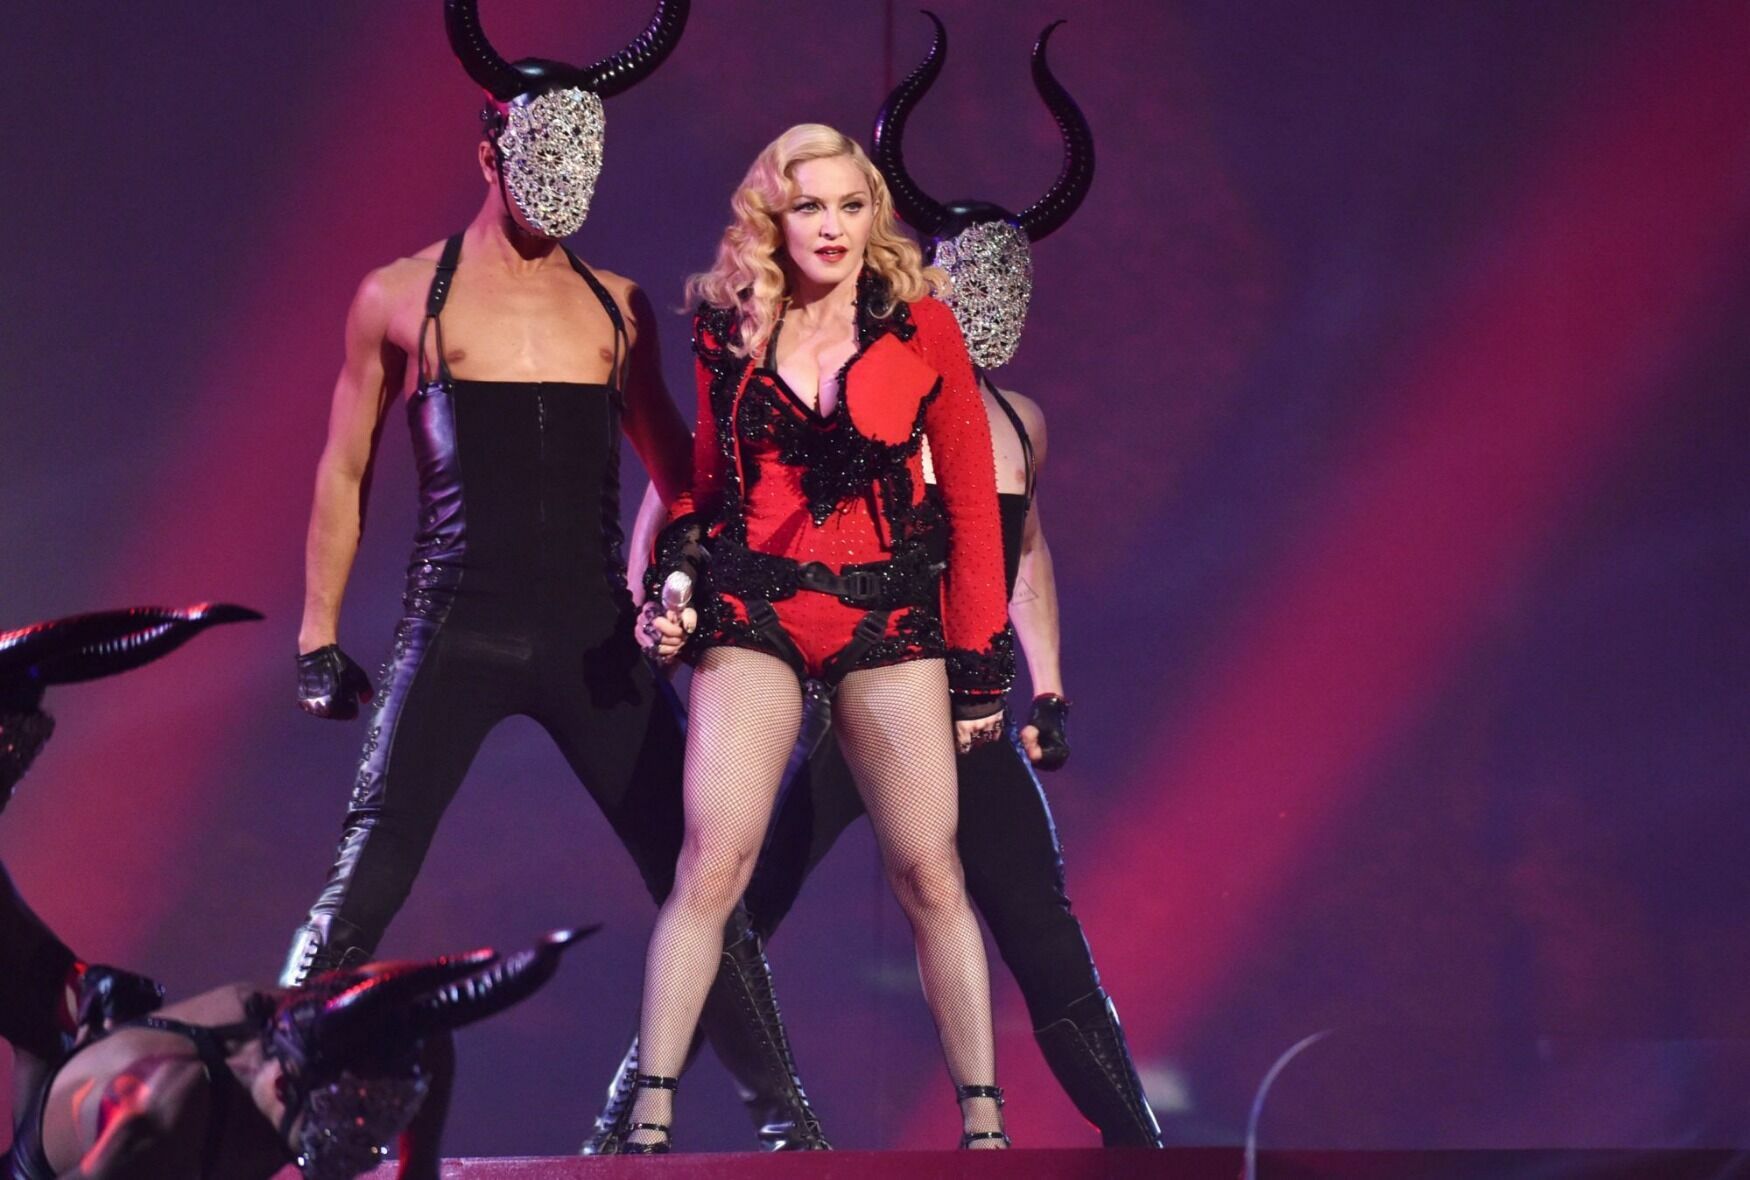 Madonna does not hide from the public whom she worships.